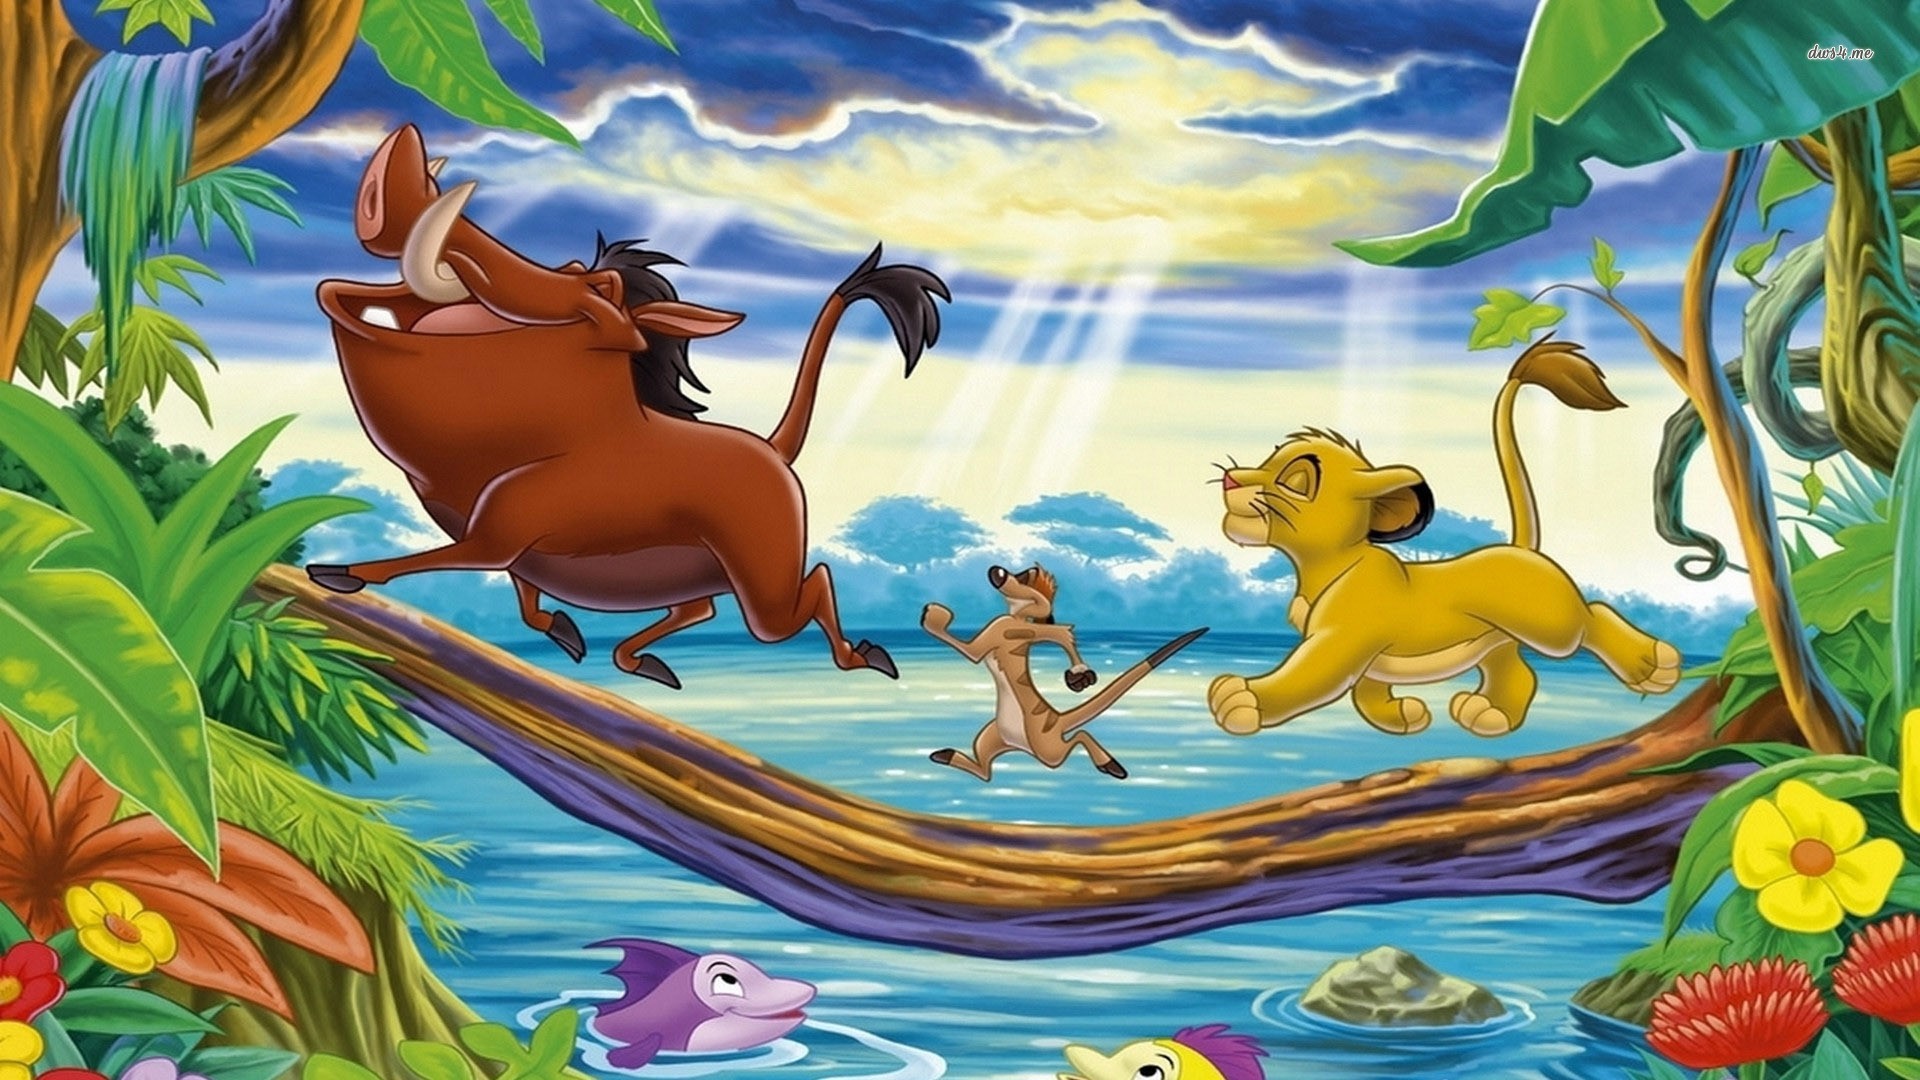 1920x1080 The Lion King HD Wallpaper For IPhone 6 Cartoons Wallpapers Hd Simba Free